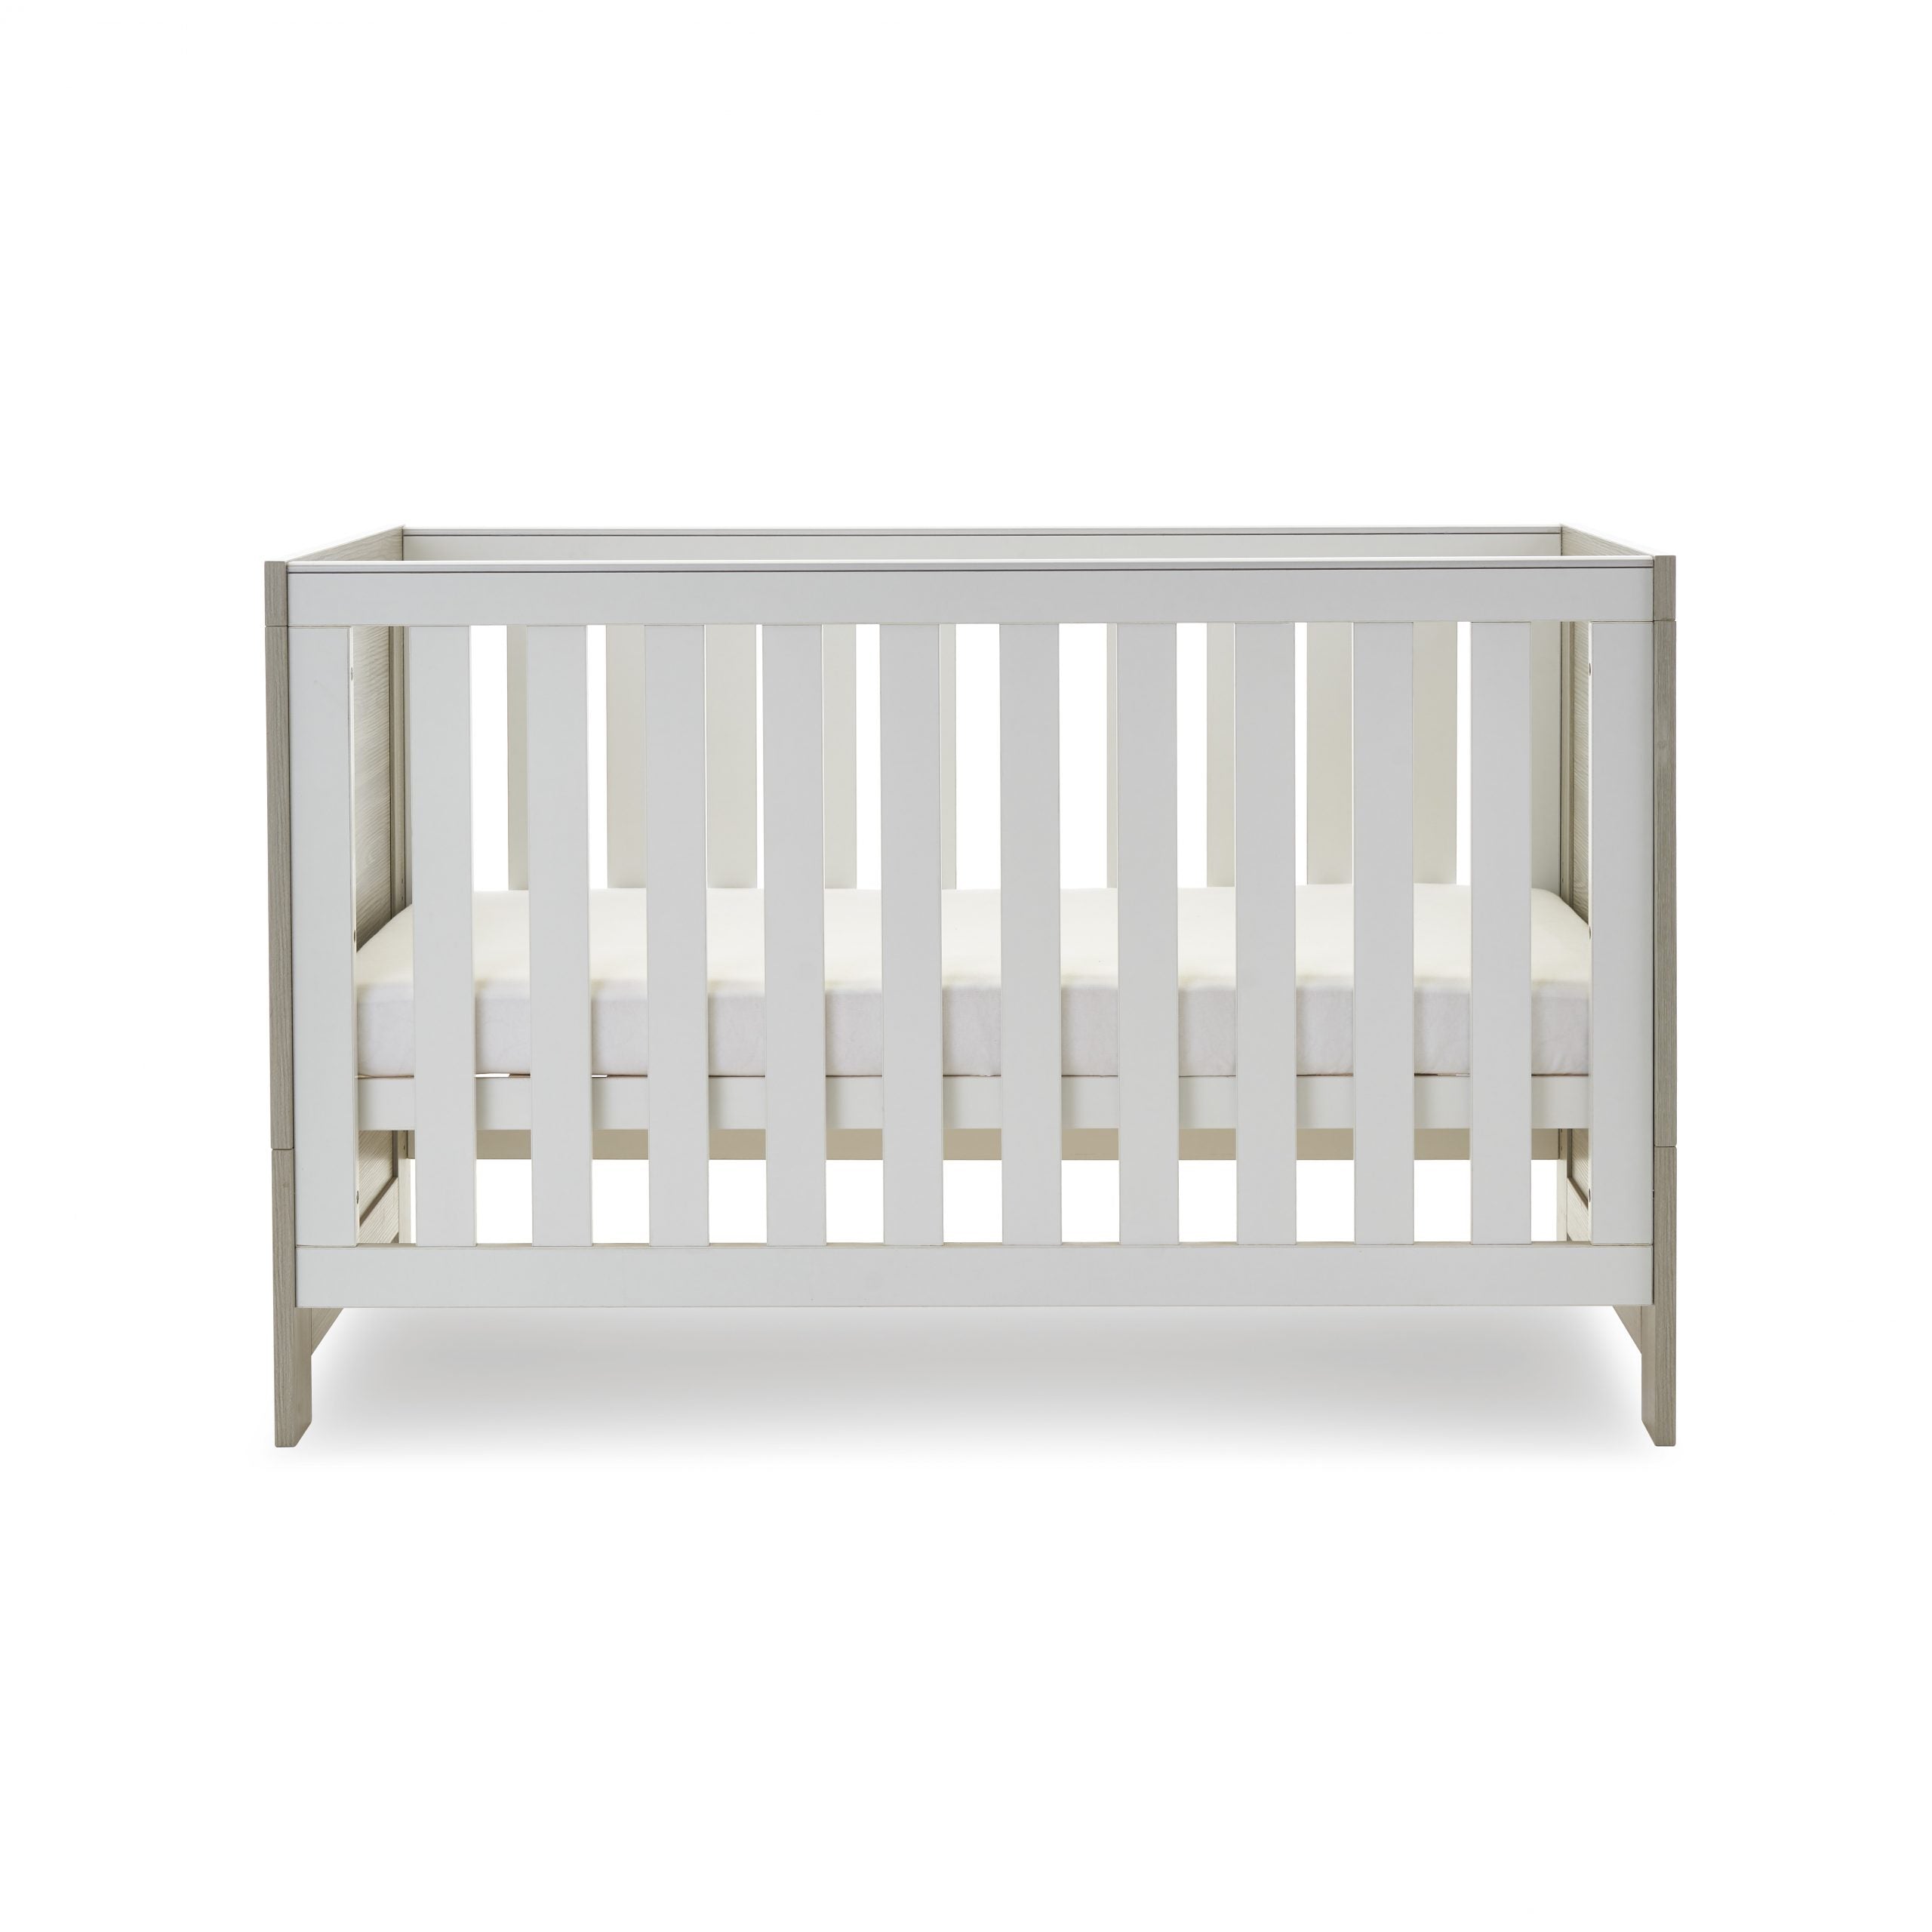 Obaby Nika Cot Bed - Grey Wash with White